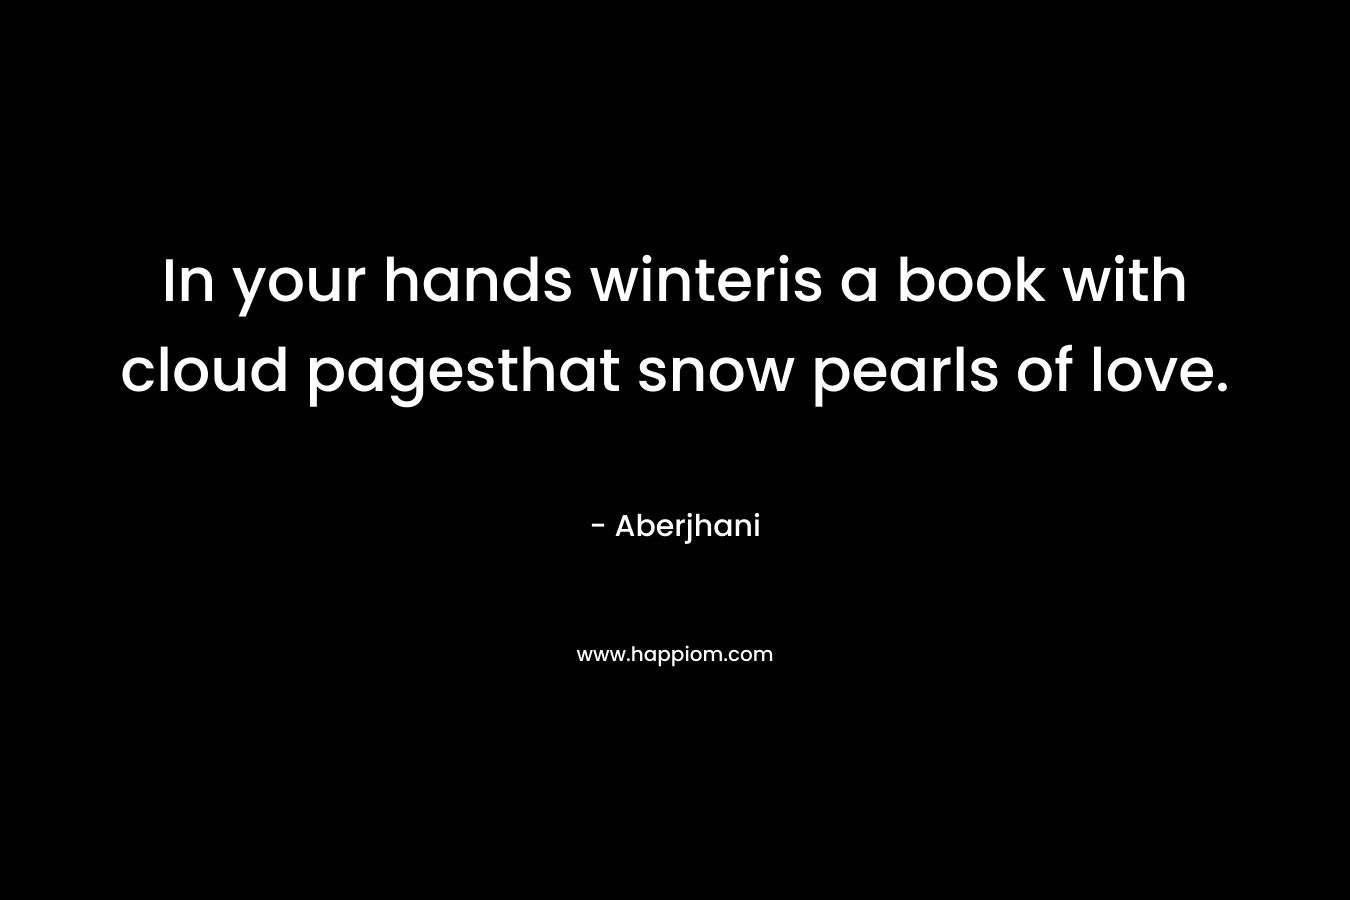 In your hands winteris a book with cloud pagesthat snow pearls of love.